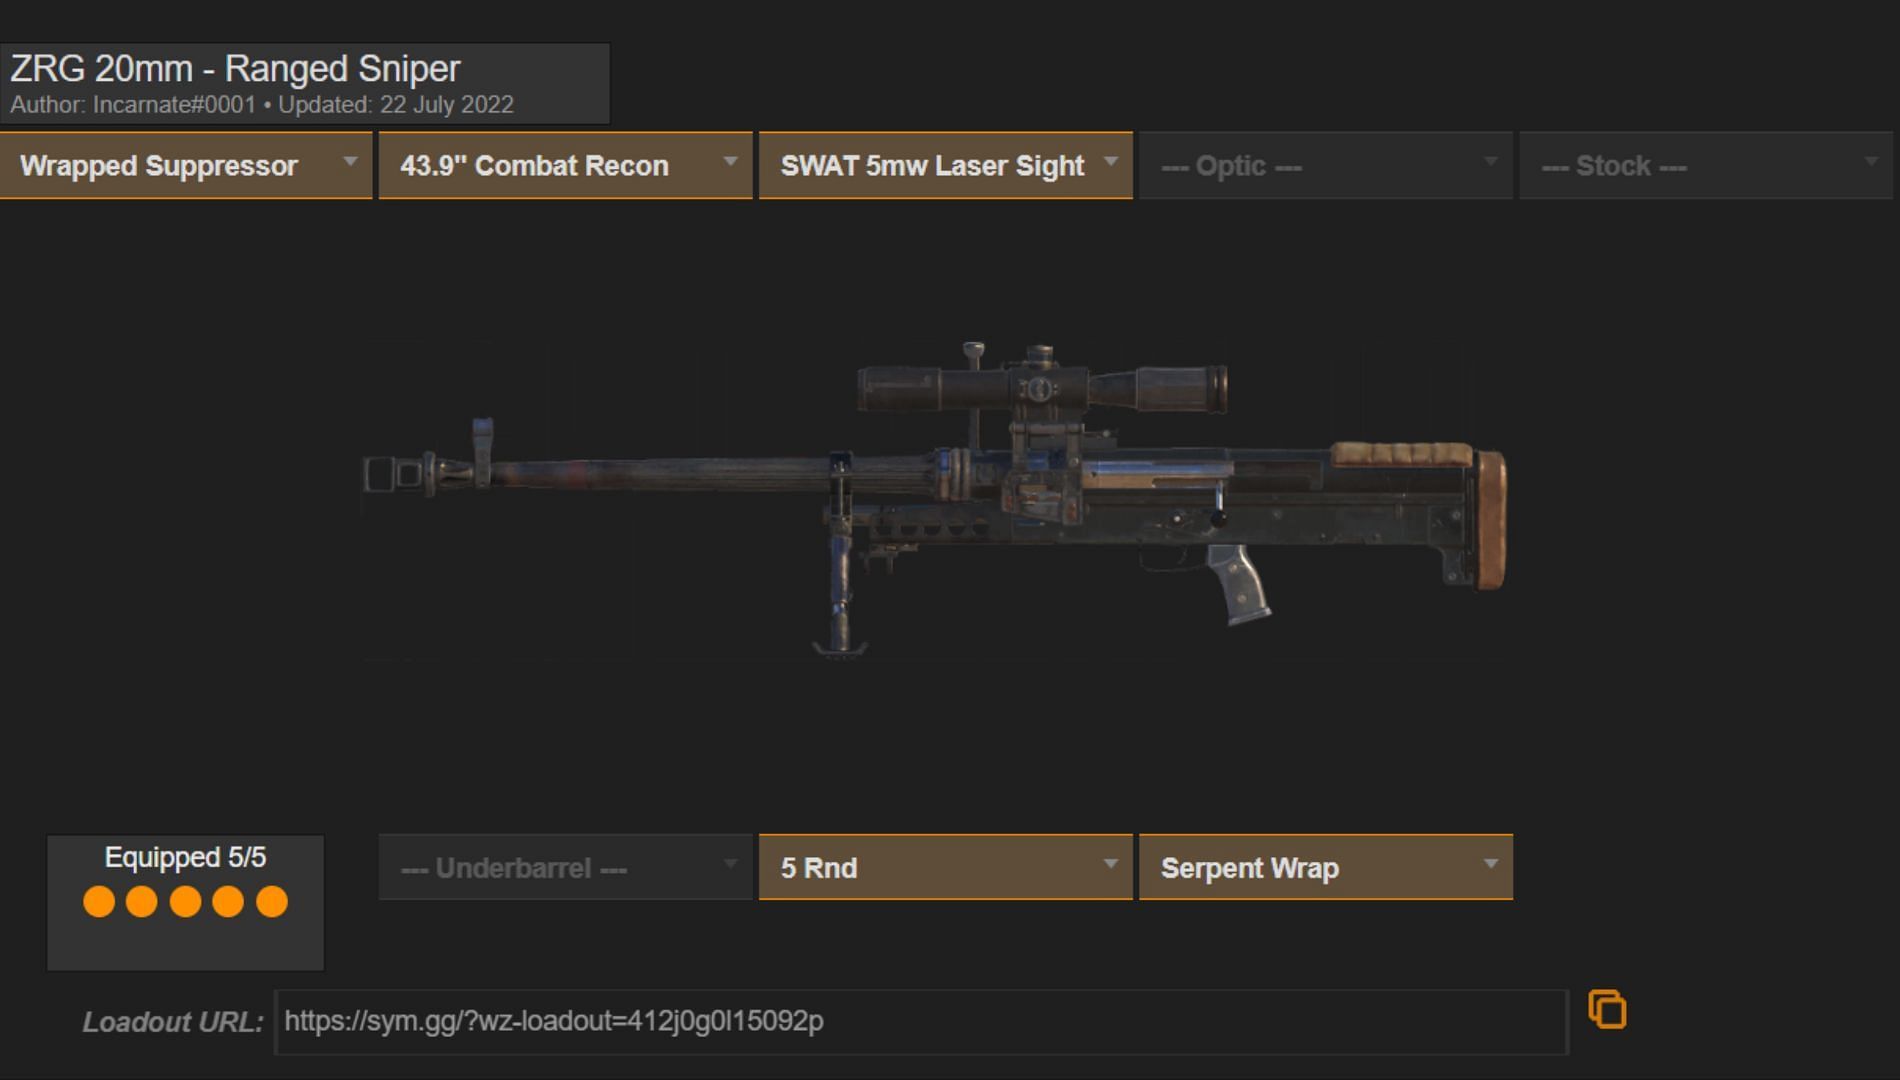 Call of Duty Warzone ZRG 20mm loadout (Image via sym.gg)